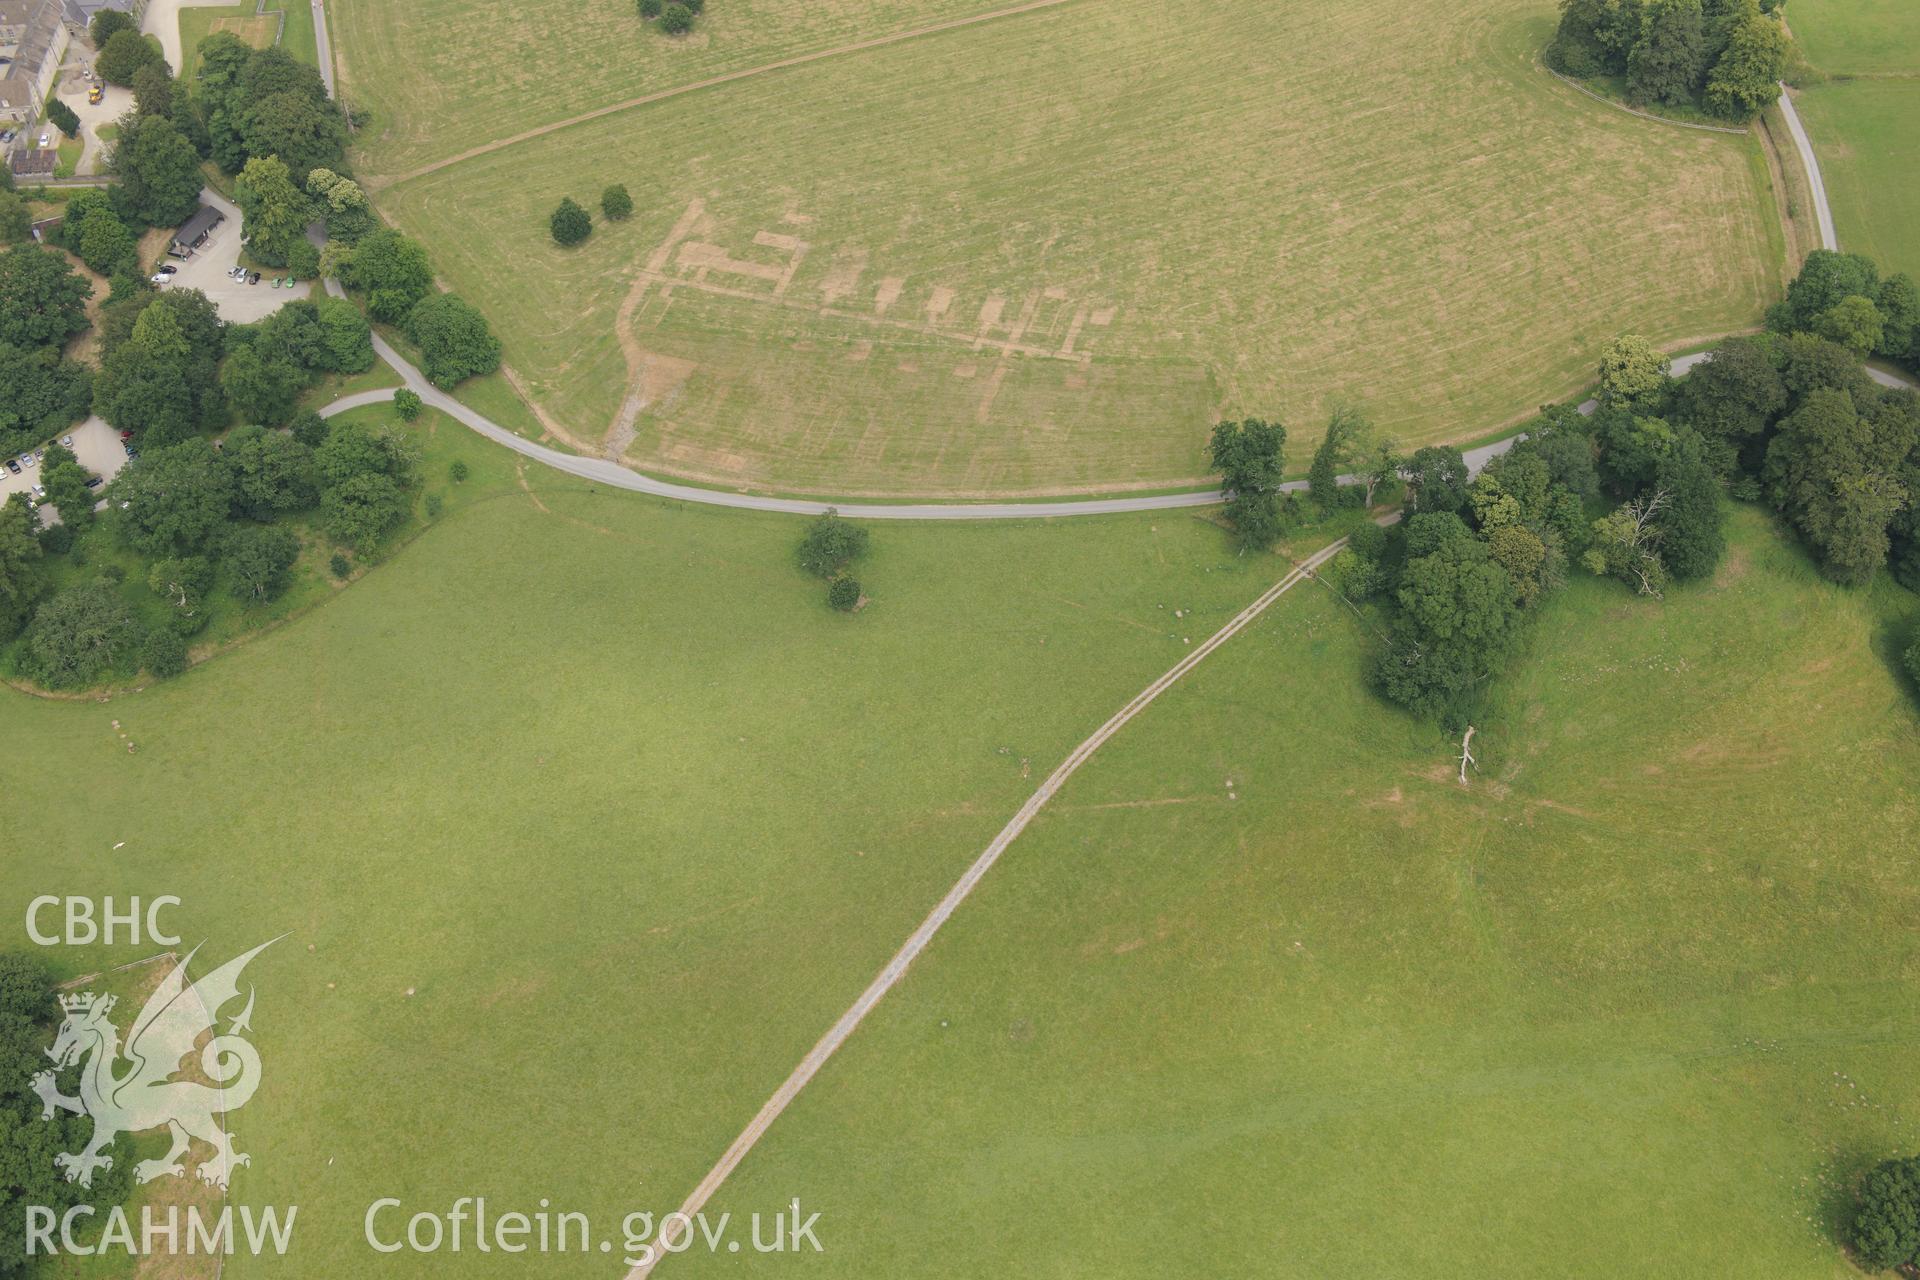 Royal Commission aerial photography of parchmarks in Dinefwr Park recorded during drought conditions on 22nd July 2013.